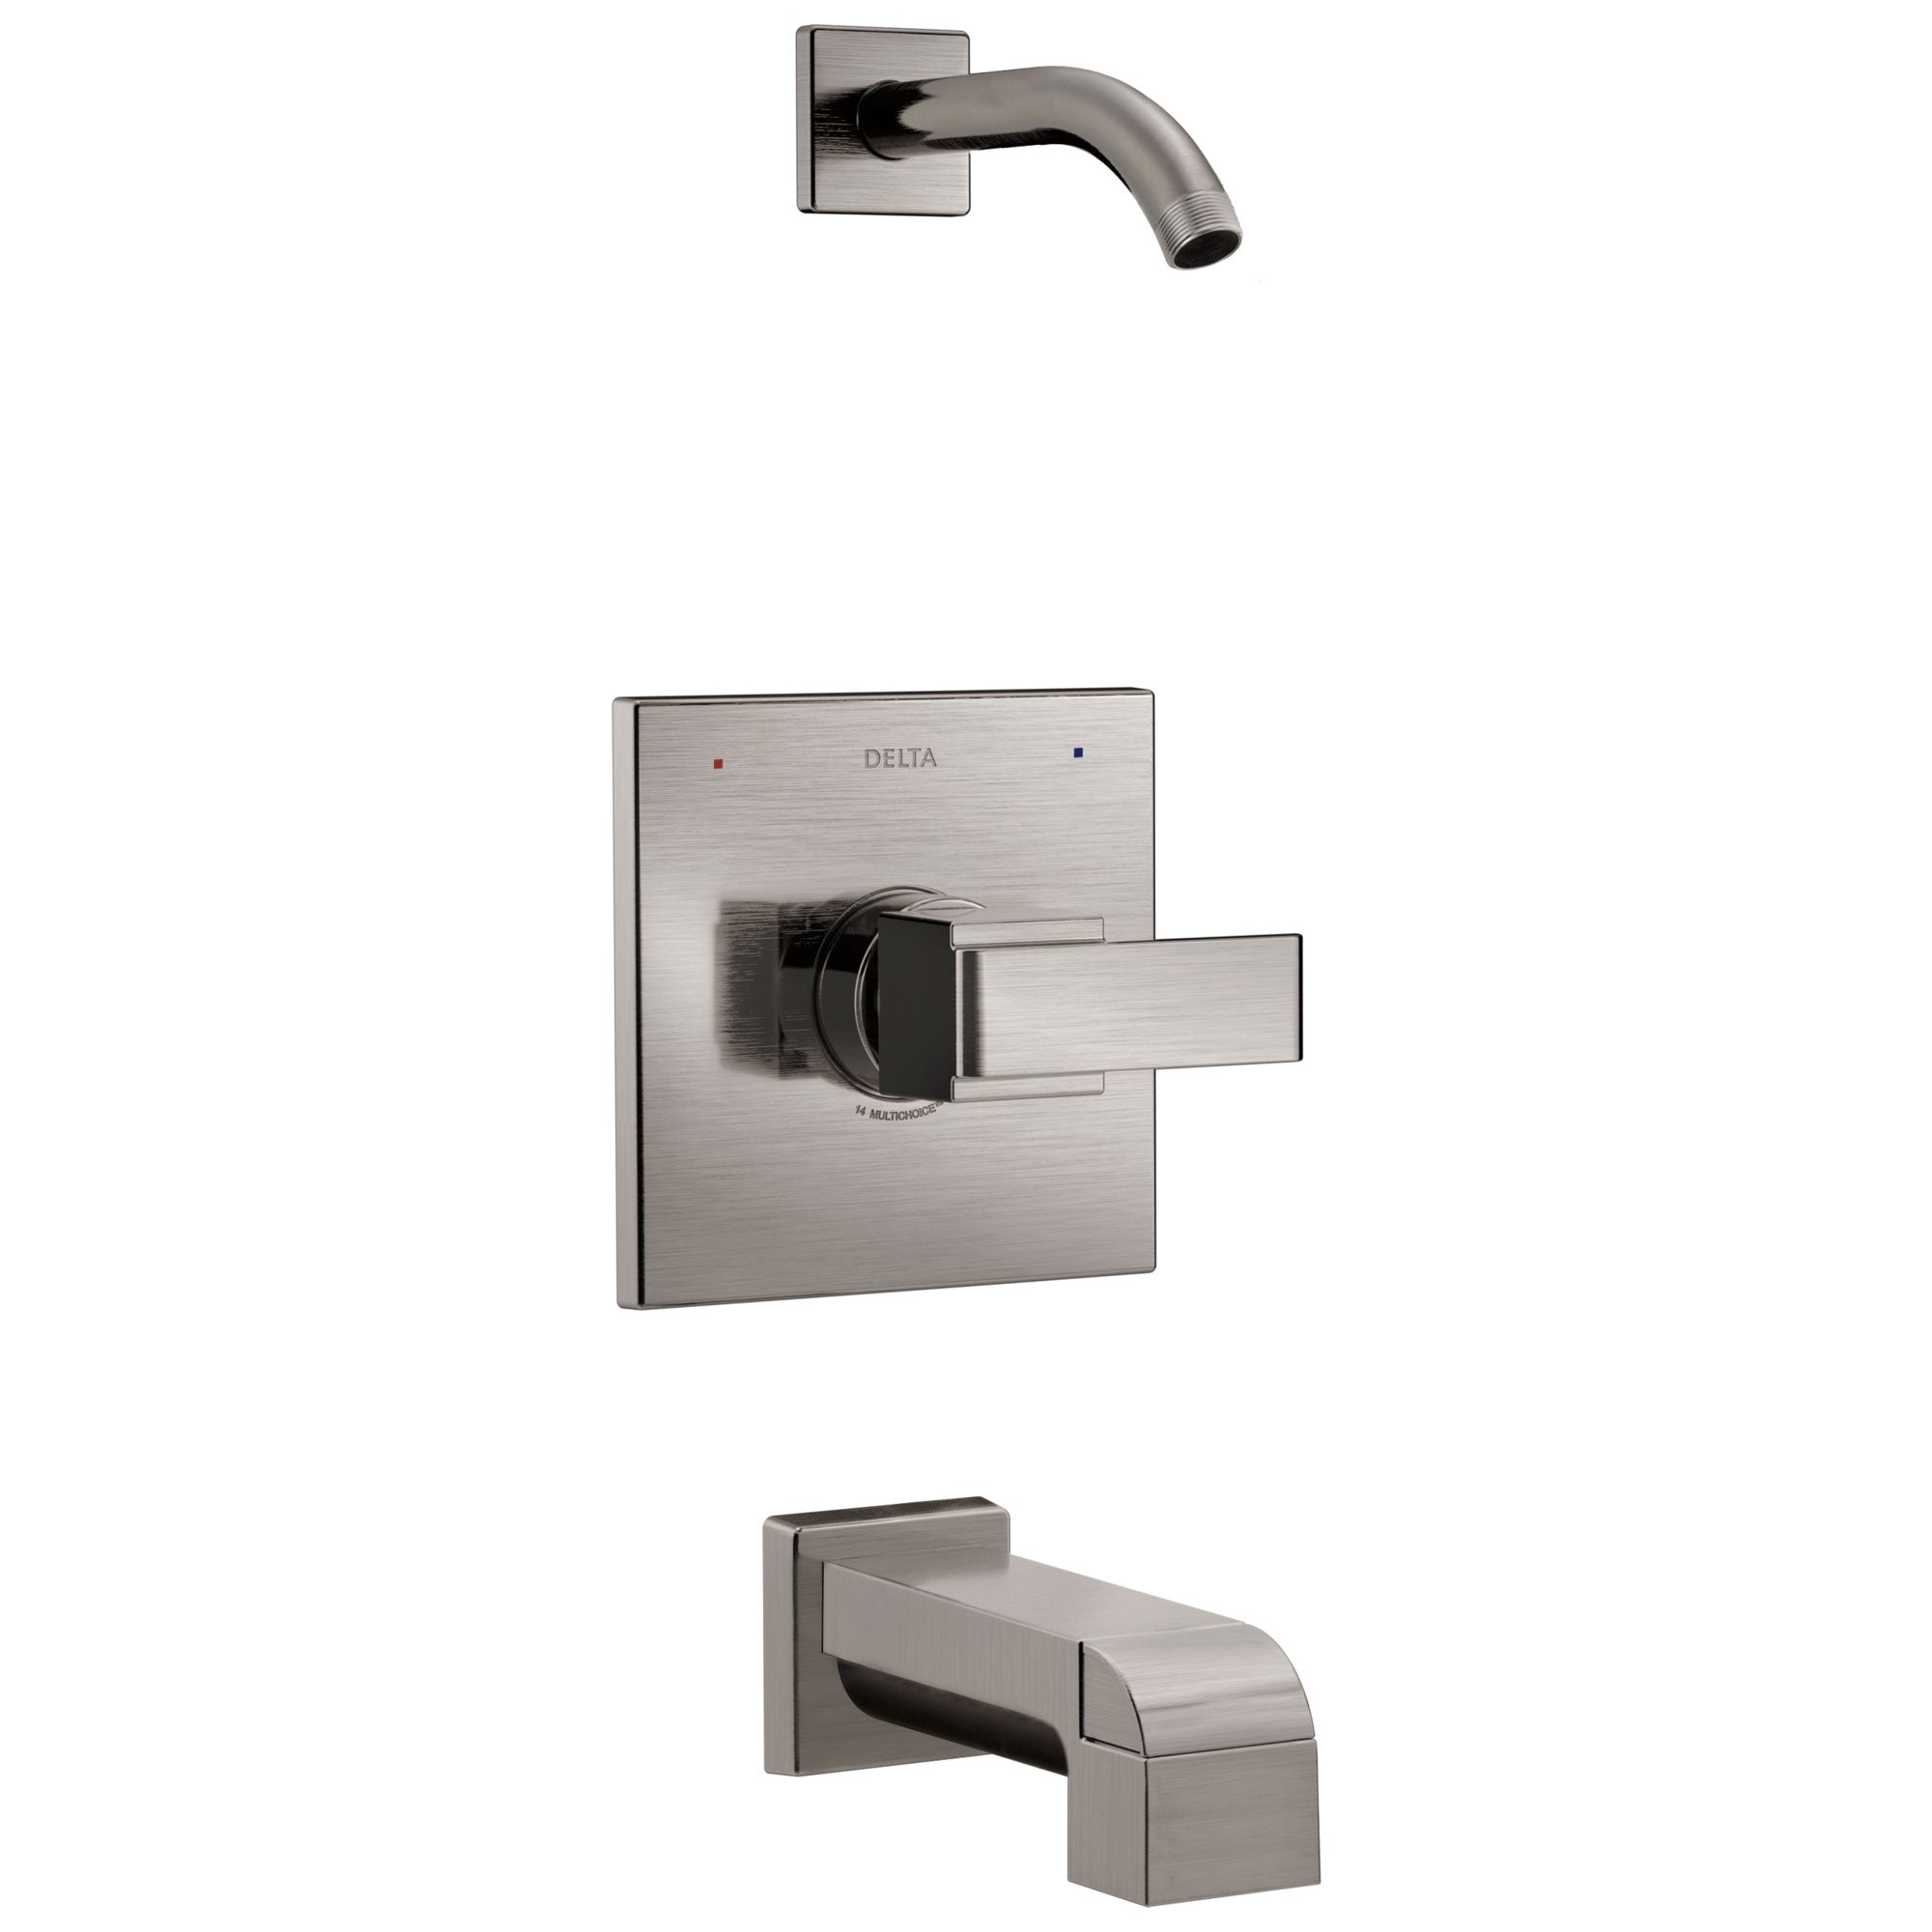 Delta Ara 1-Handle Tub and Shower Faucet Trim Kit in Stainless Steel Finish with Less Showerhead Includes Rough-in Valve with Stops D2565V